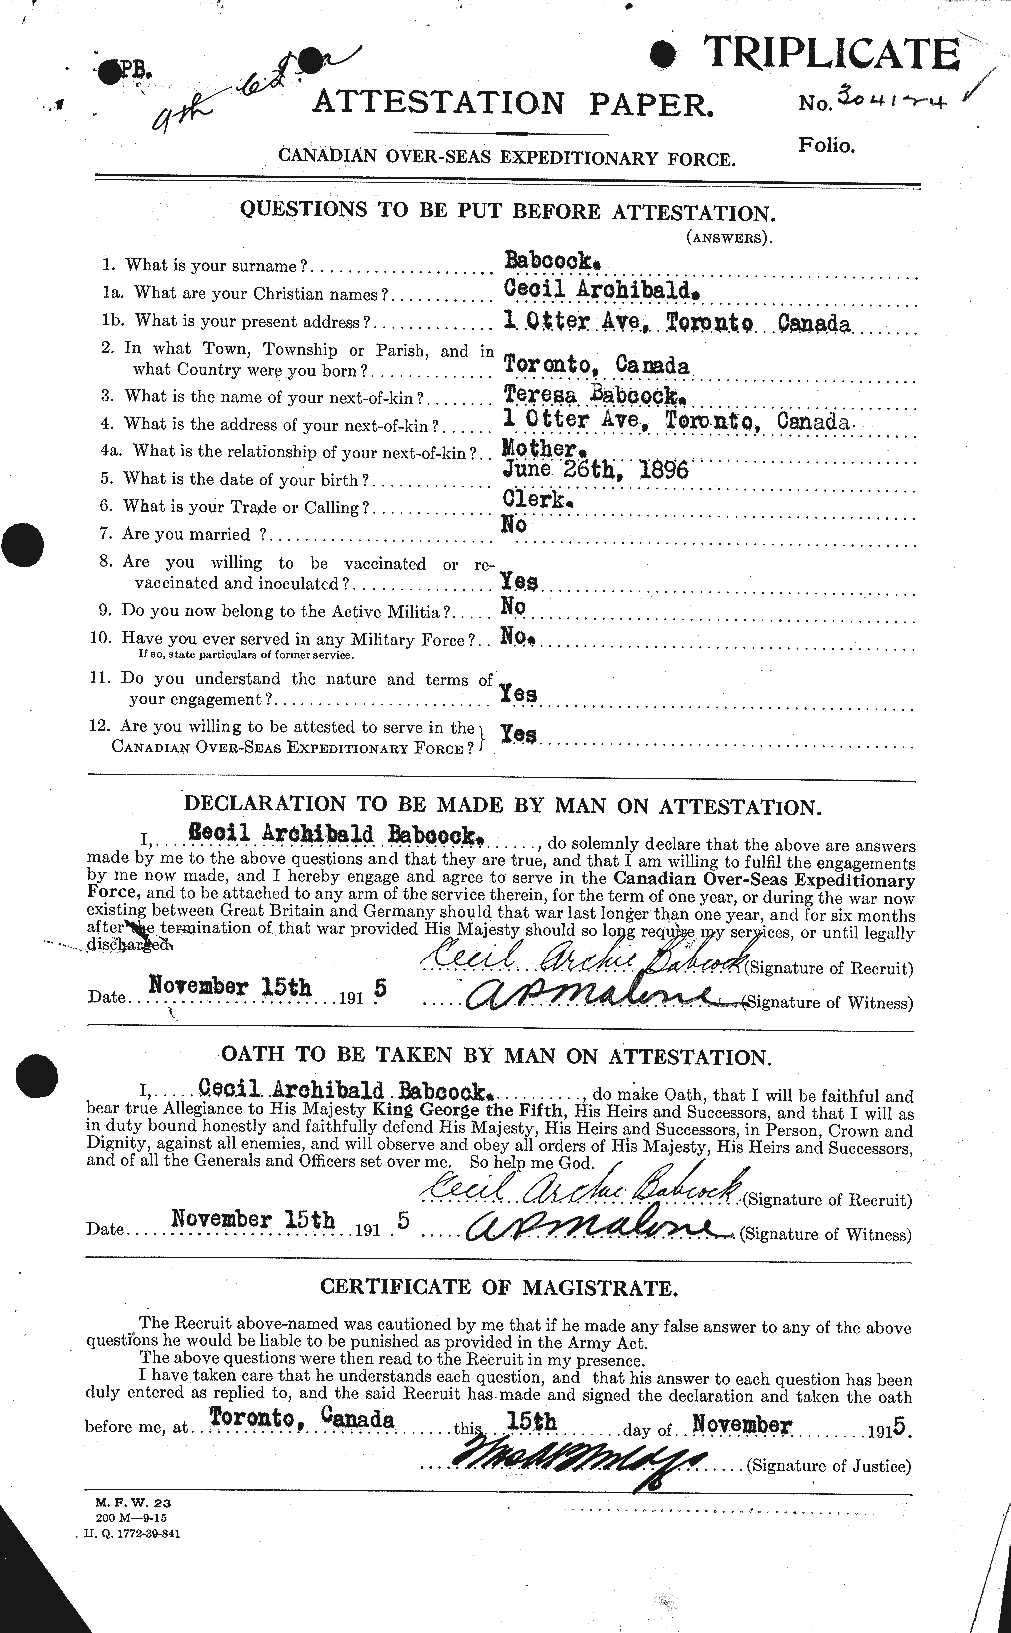 Personnel Records of the First World War - CEF 218256a